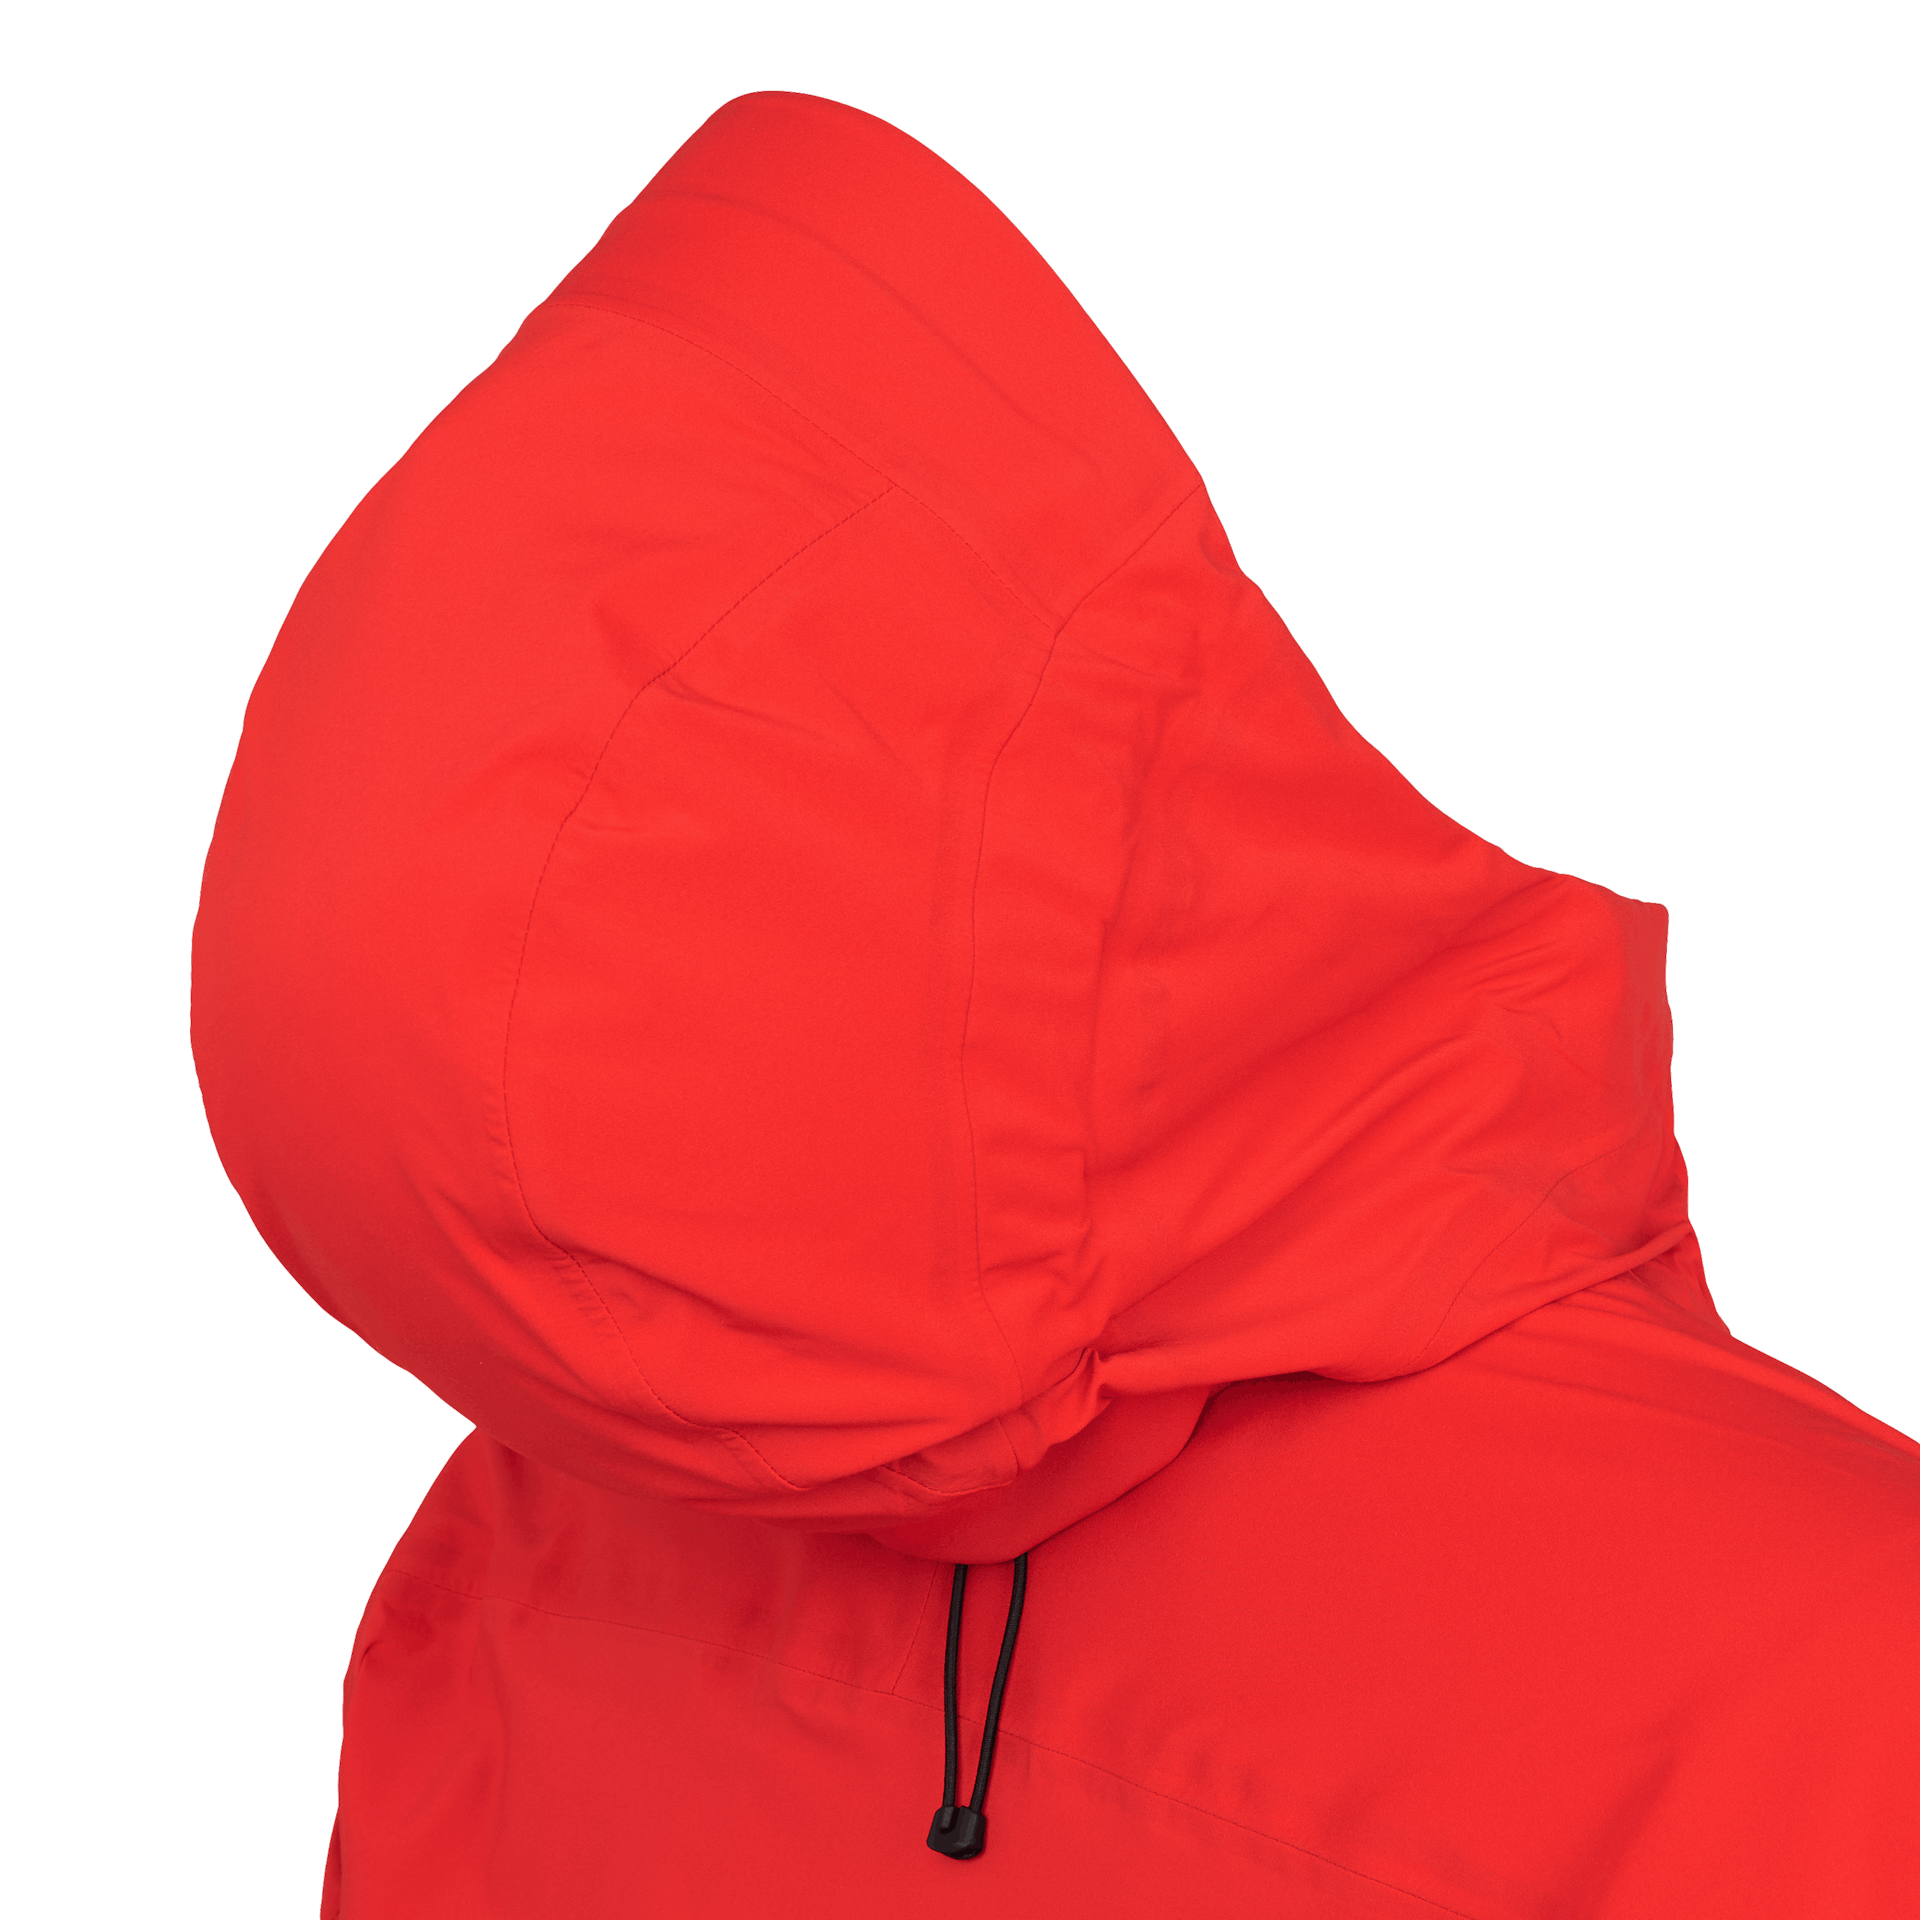 Snaefell Shell Jacket